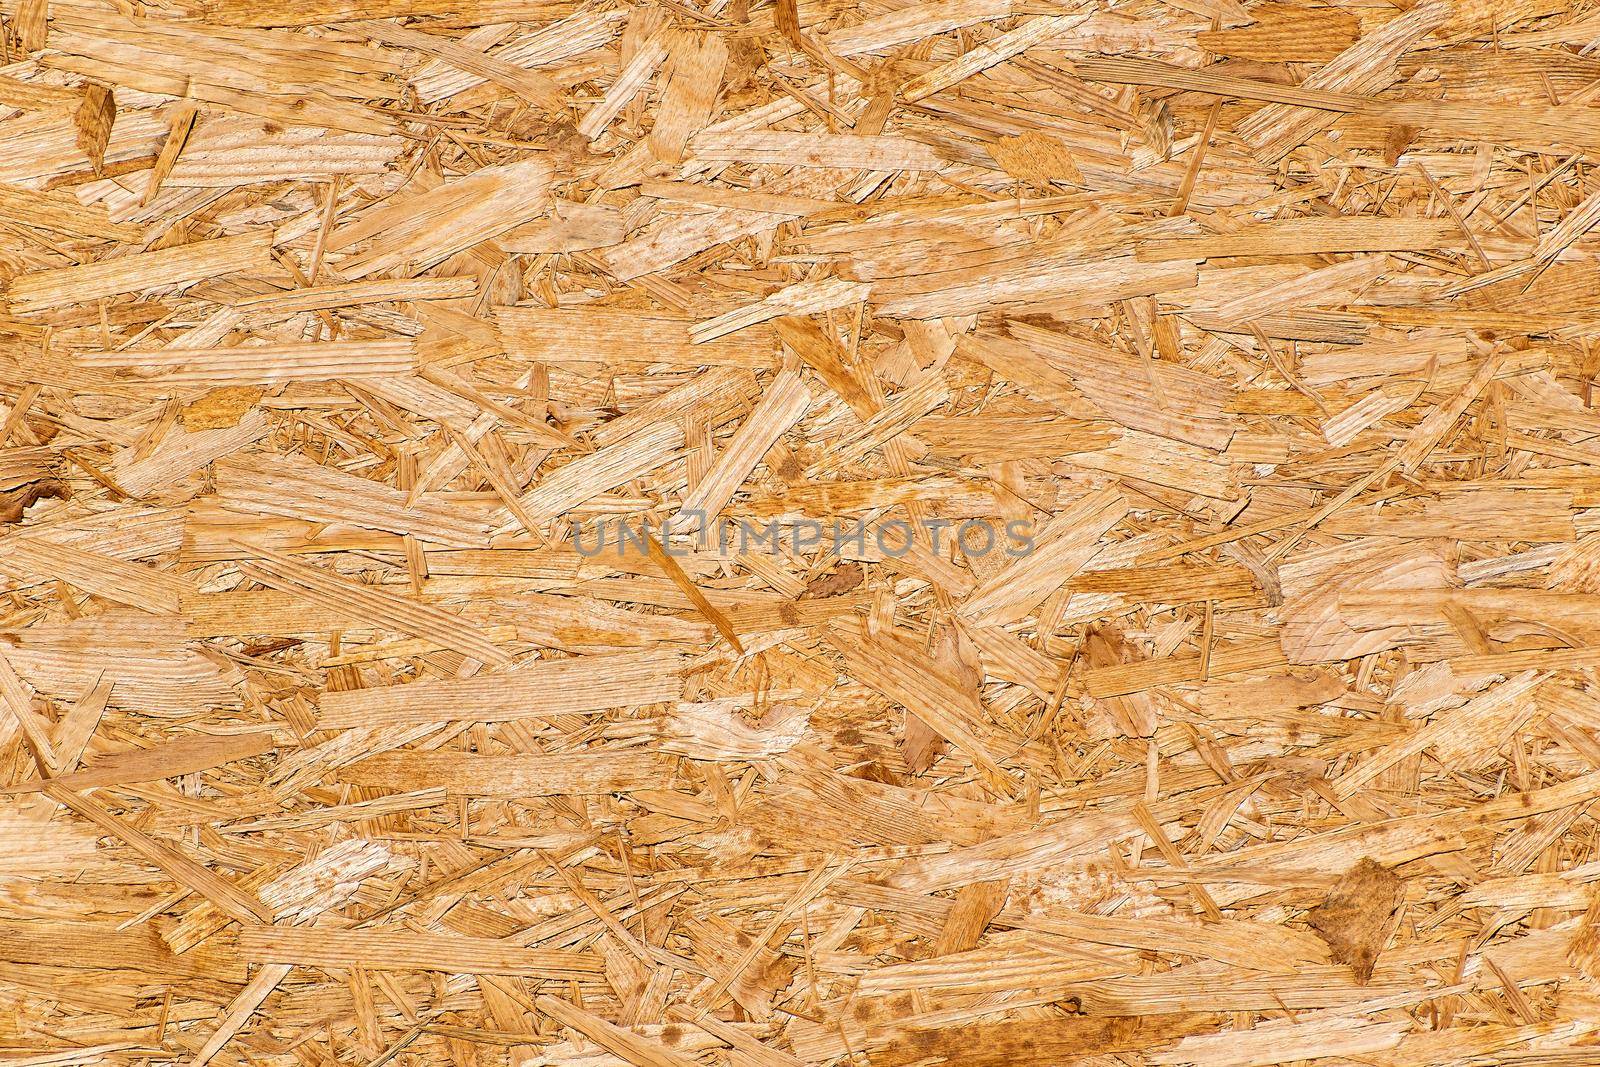 OSB plate area composed of many pressed chips Texture, background for further work.